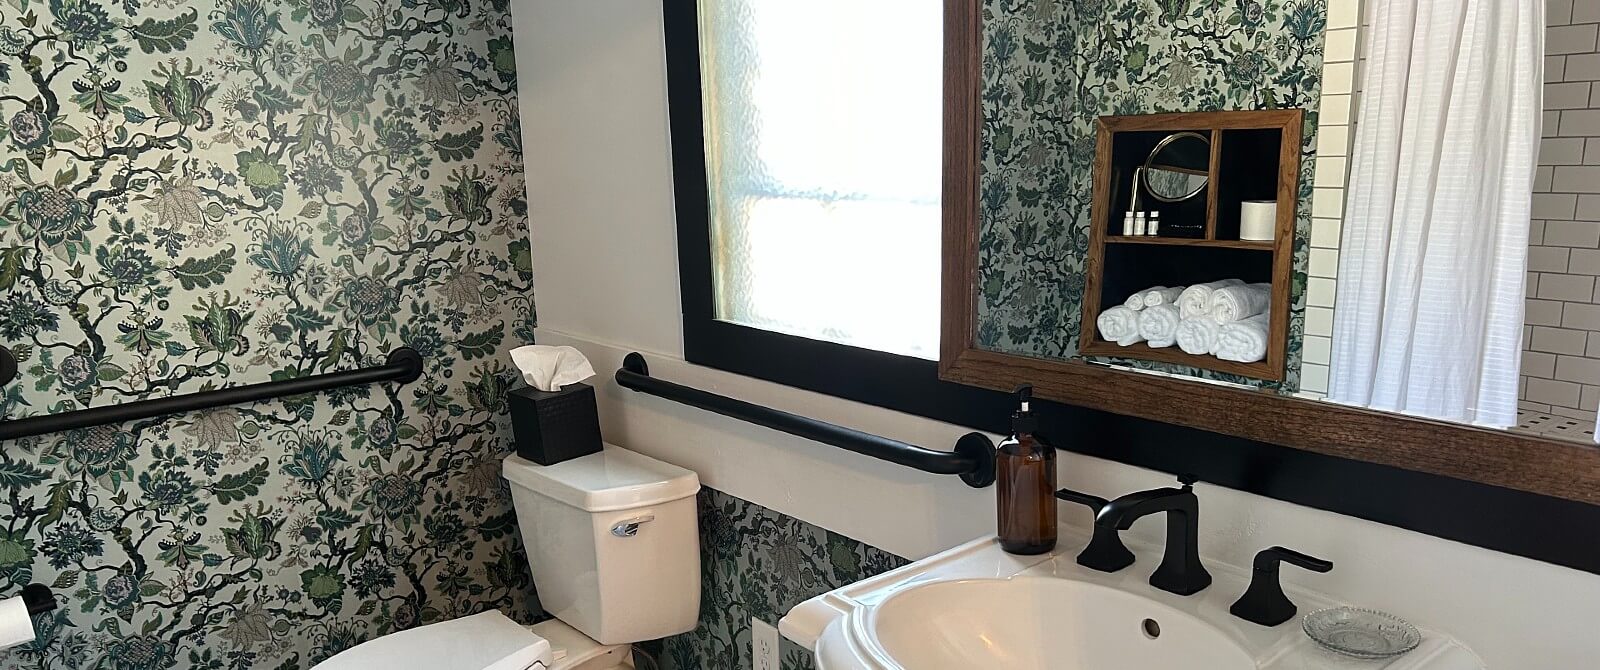 Bathroom with pedestal sink, large wood-framed mirror, toilet below a window and floral wallpaper